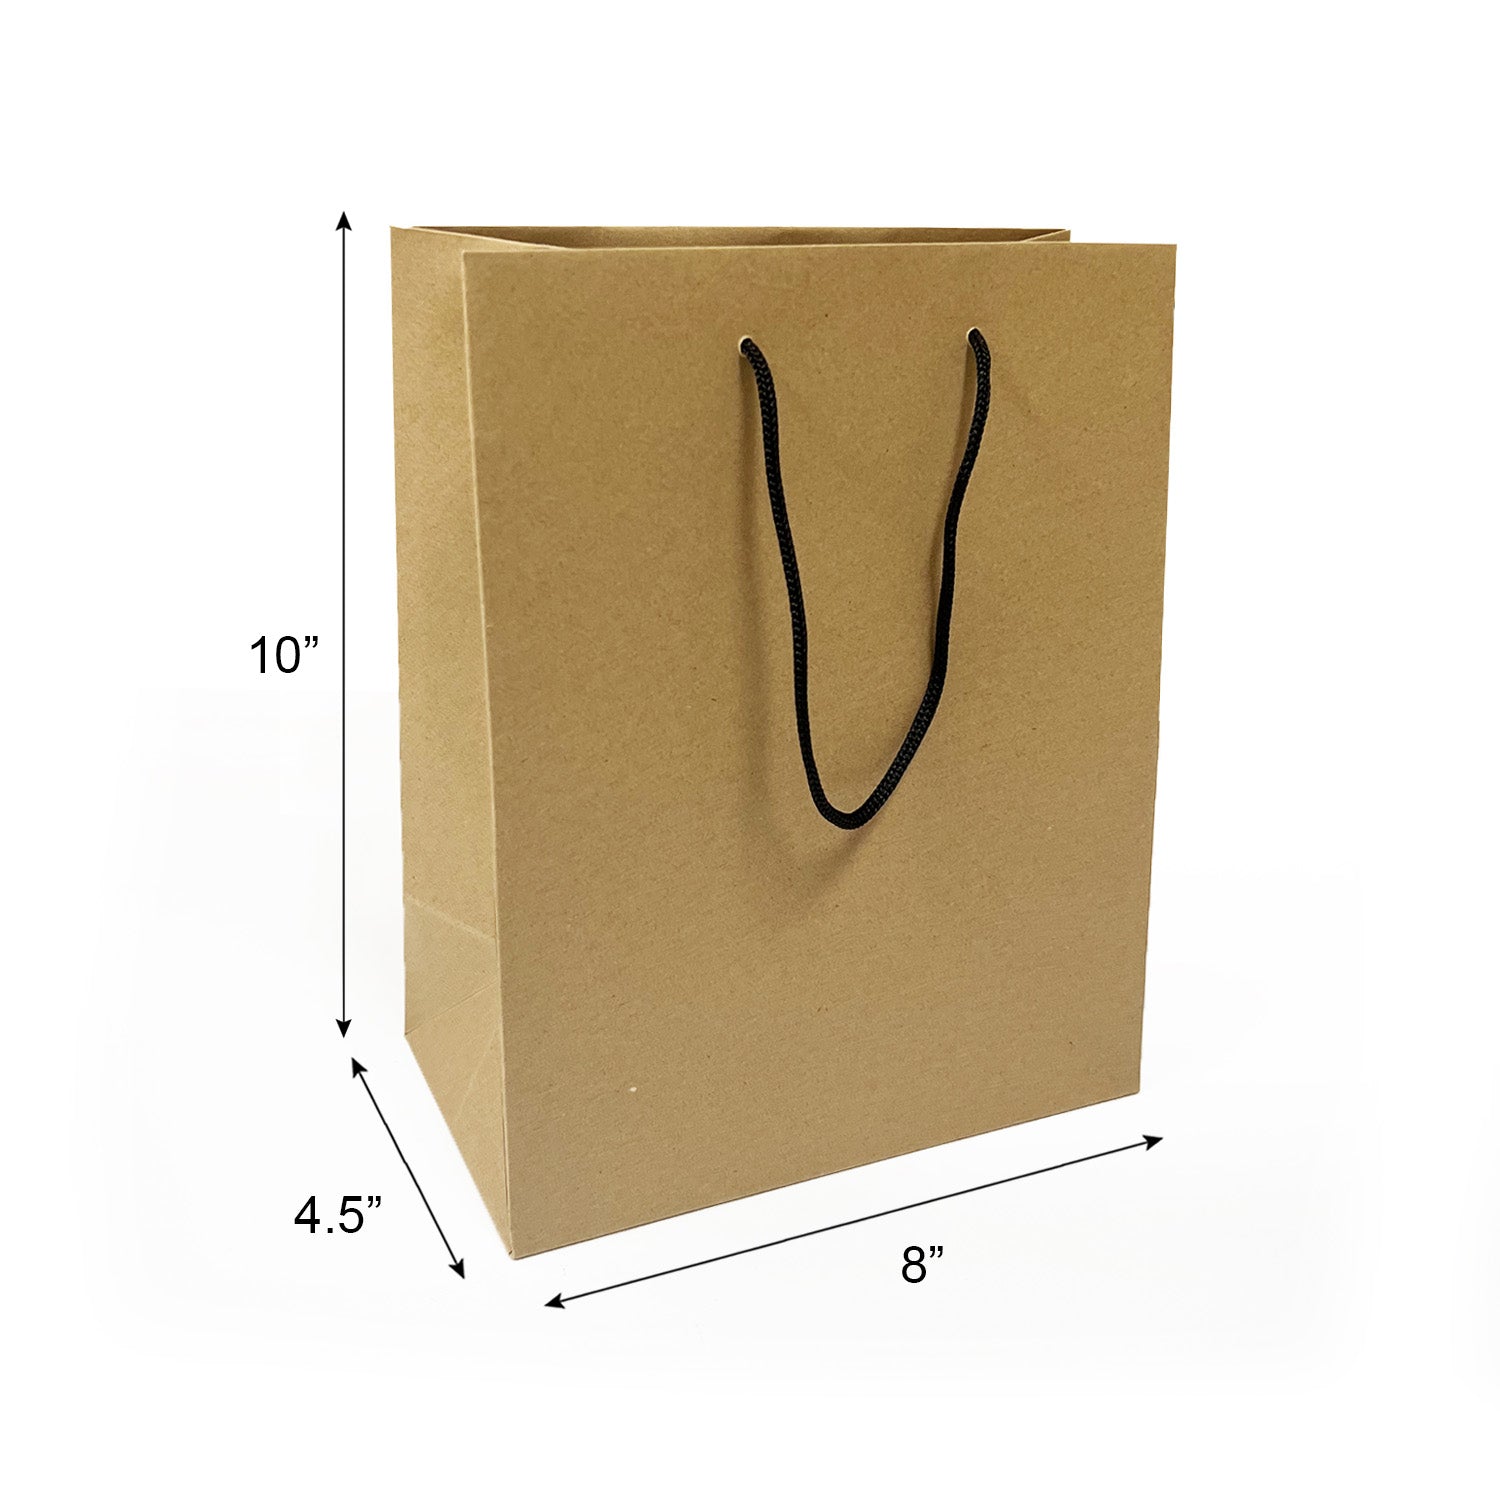 150 Pcs, Cub,  8x4.75x10.25 inches, Euro Tote Paper Bags, with Rope Handle